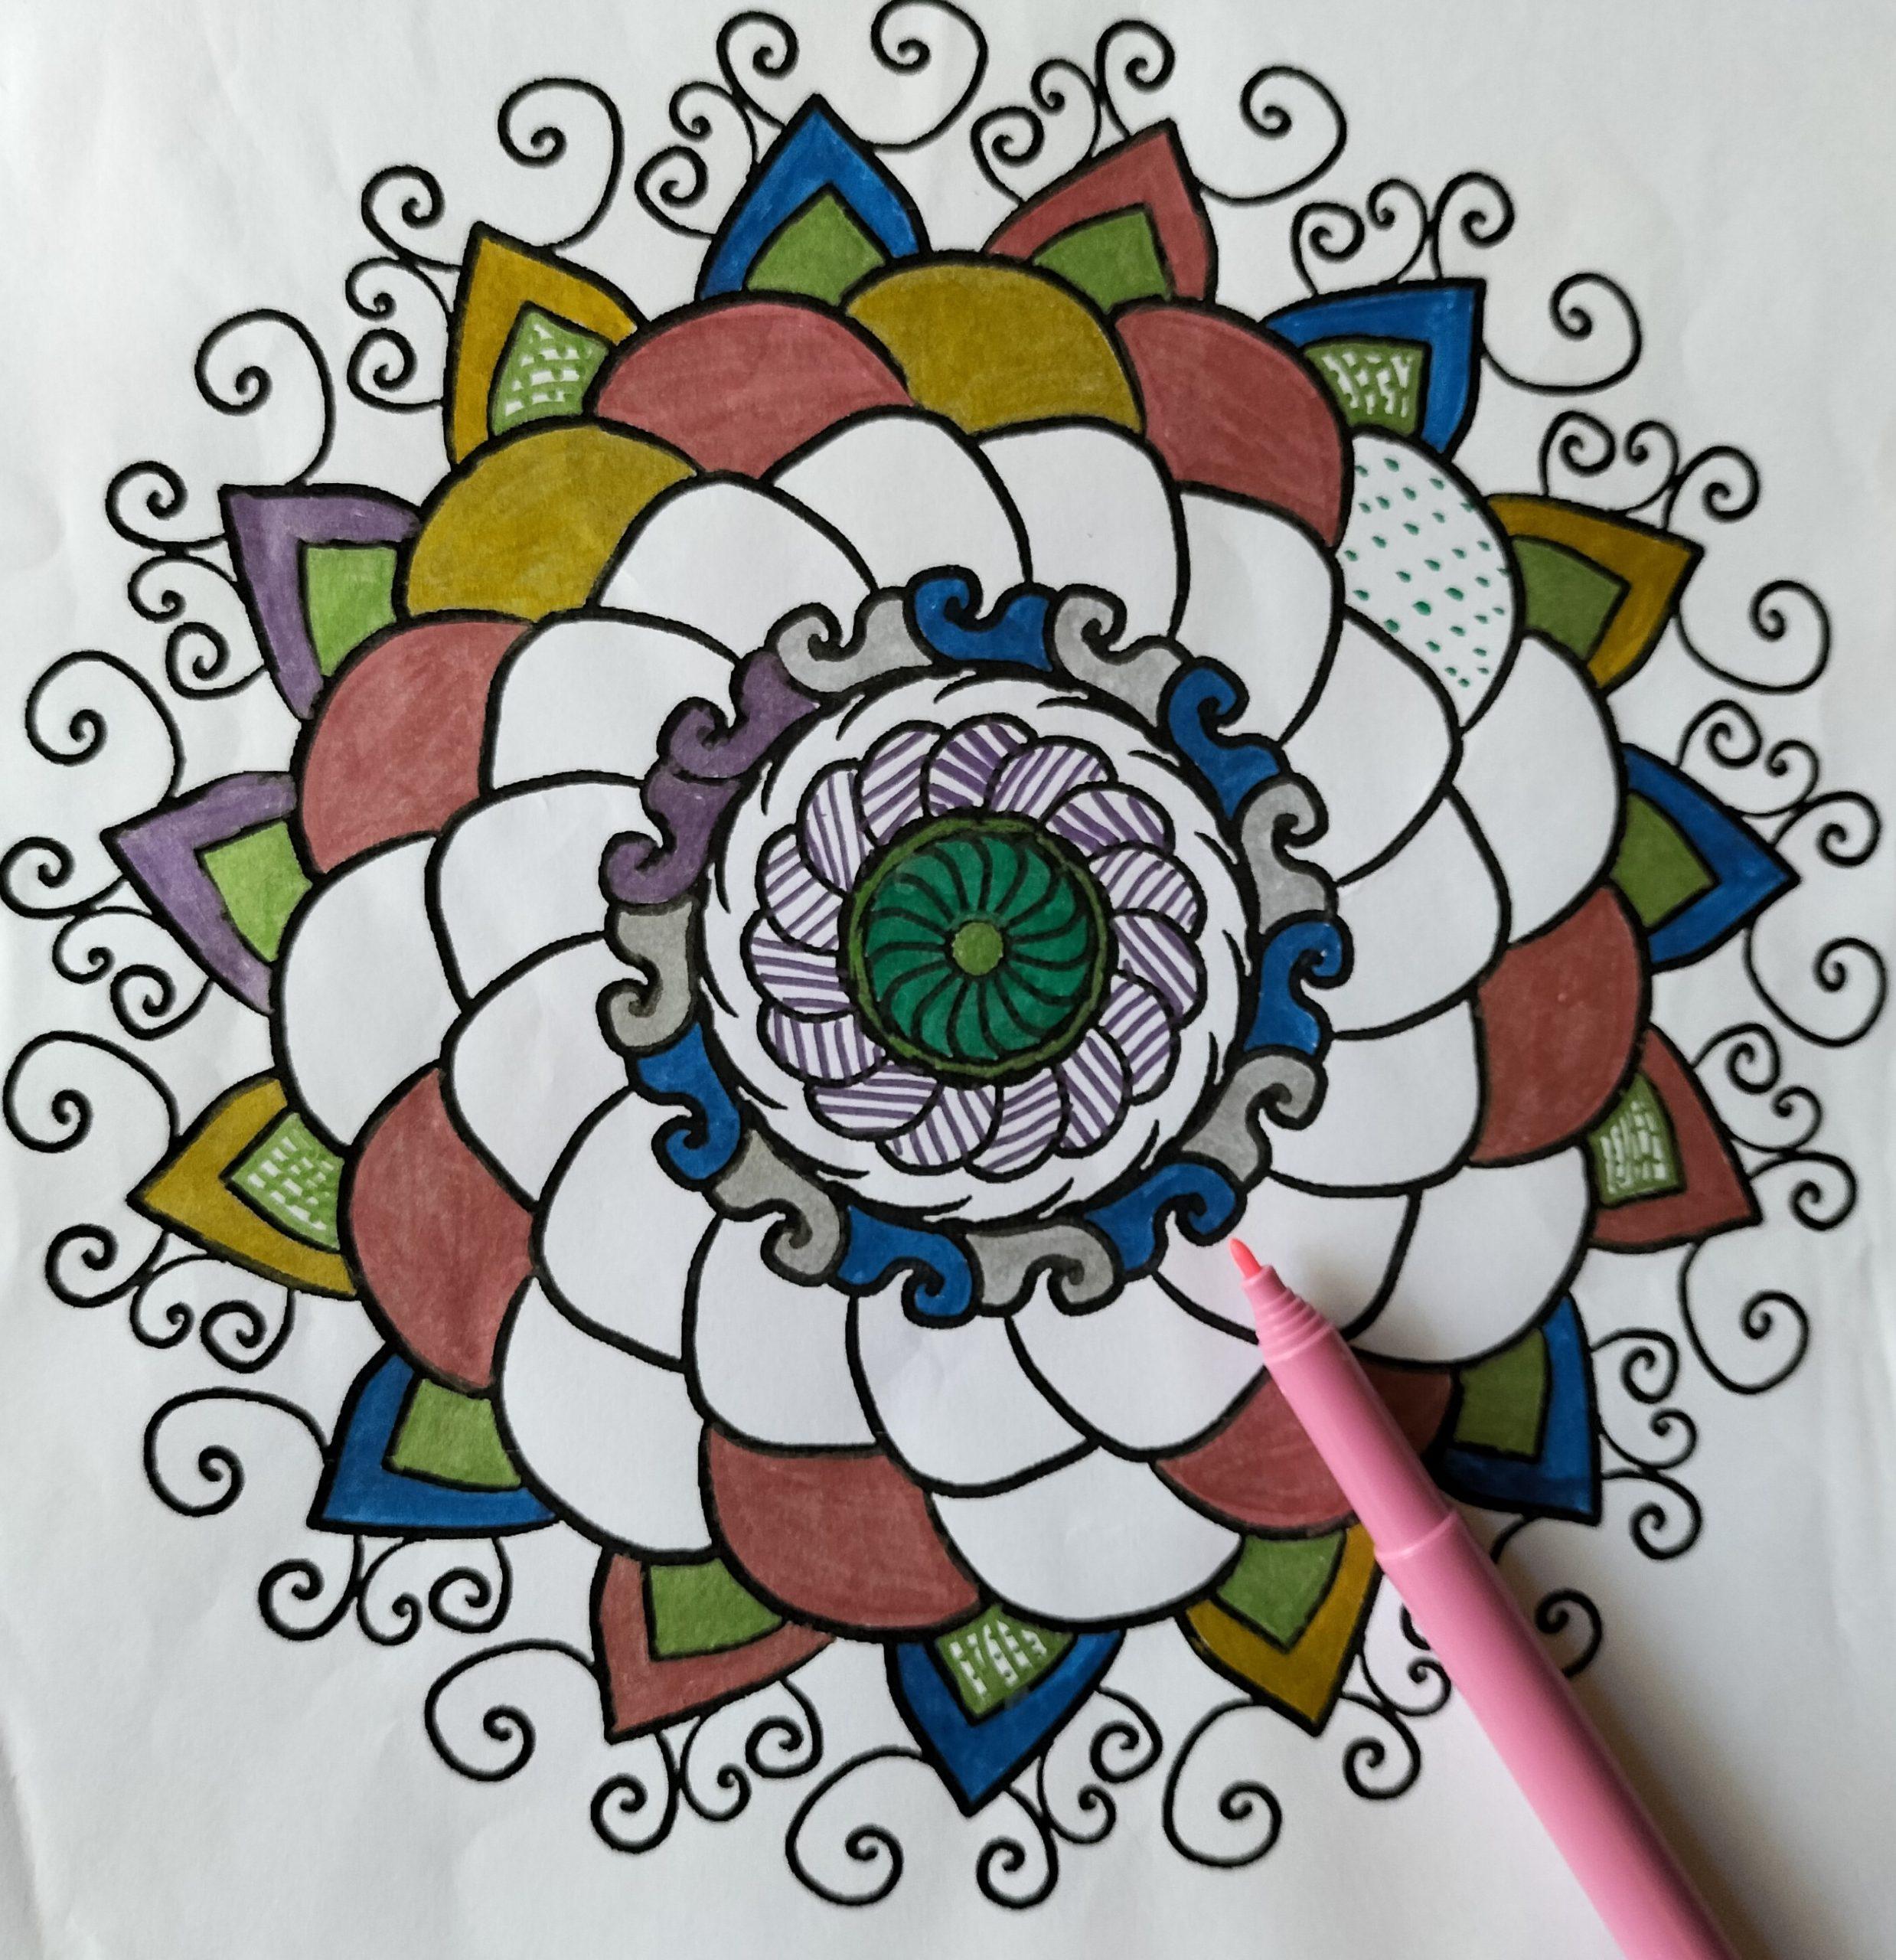 Meditative Mandala Art combined with EFT Tapping